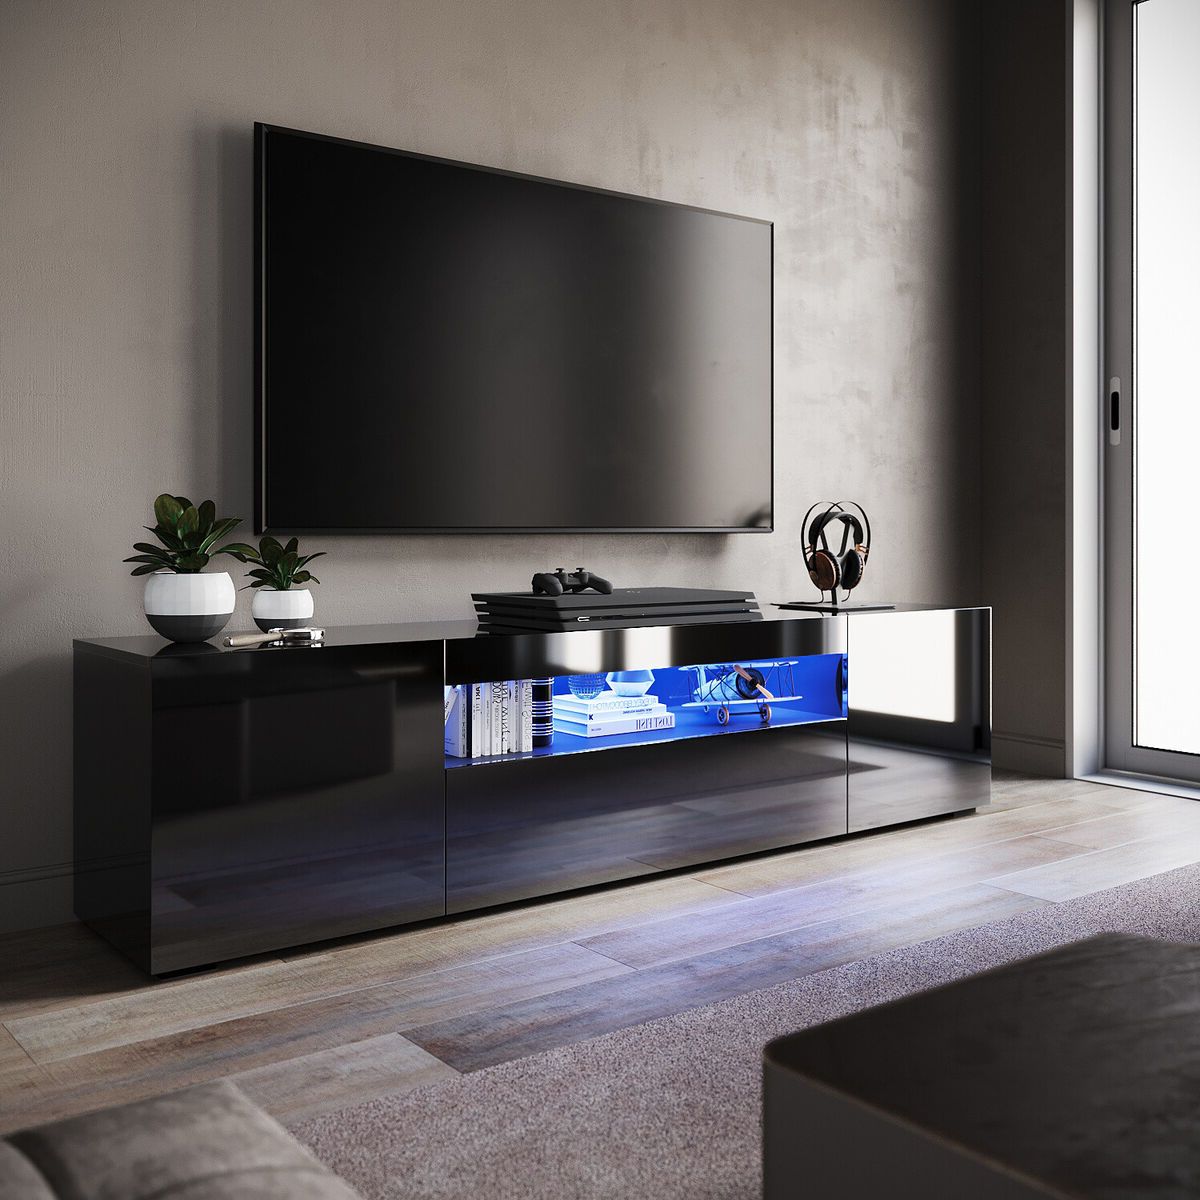 200cm High Gloss Tv Stand Black Cabinet Unit Doors Storage With Rgb Led  Cupboard | Ebay Intended For Rgb Tv Entertainment Centers (View 10 of 20)